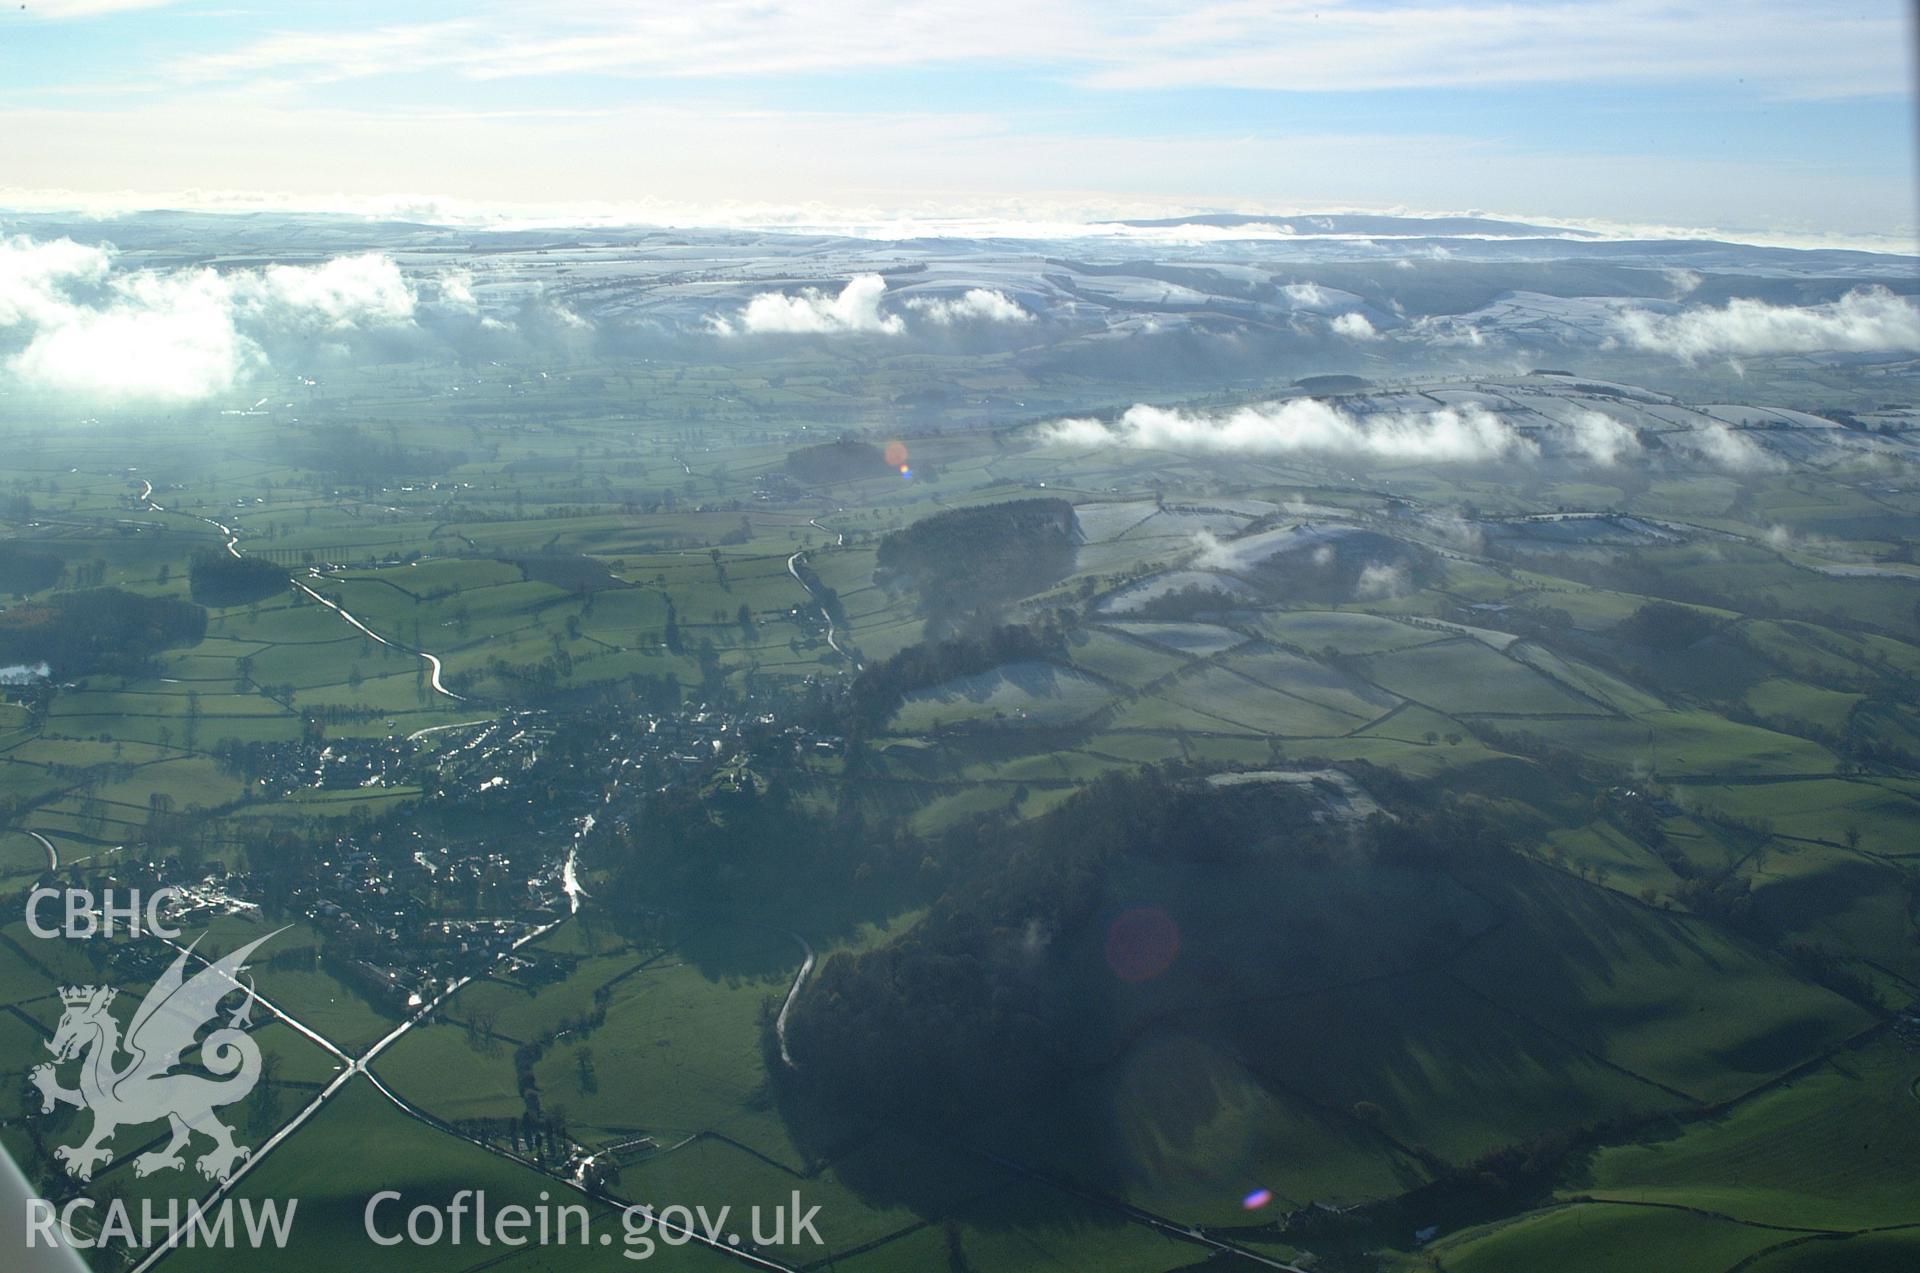 RCAHMW colour oblique aerial photograph of Ffridd Faldwyn hillfort, viewed from the north with Montgomery beyond. Taken on 19 November 2004 by Toby Driver